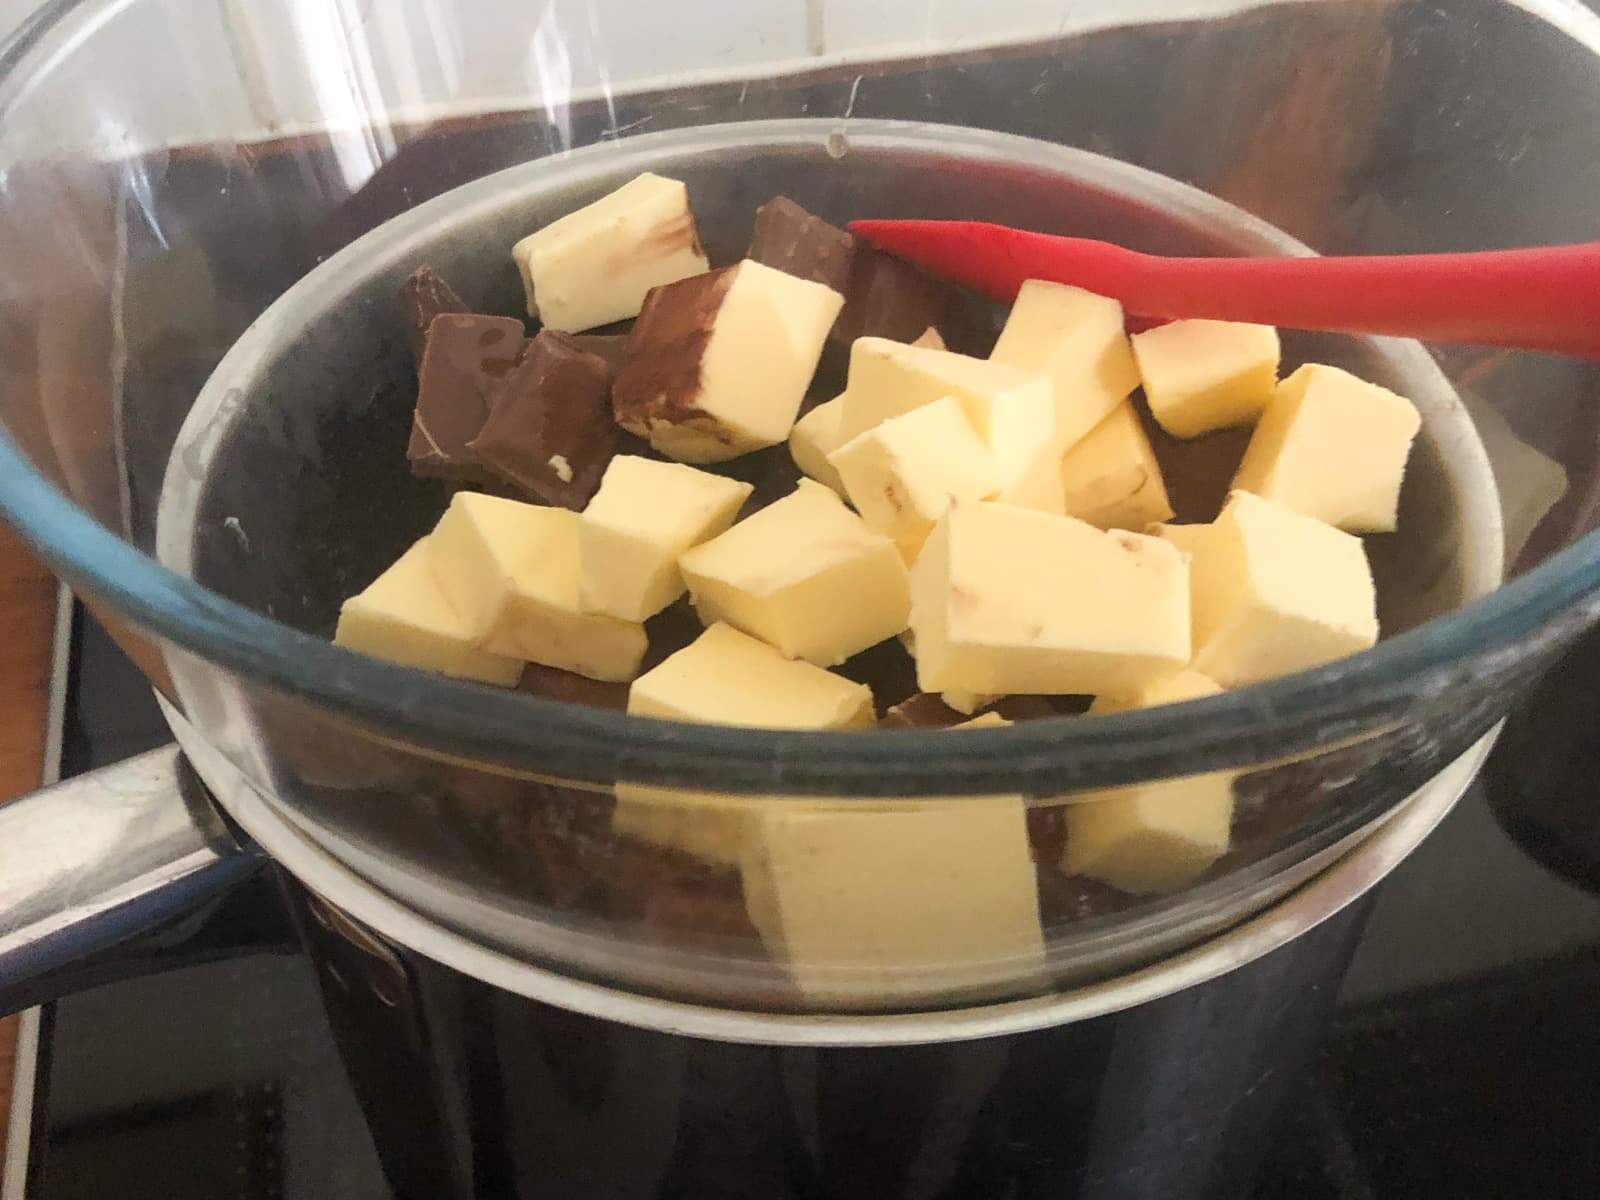 Butter and chocolate being melted in a glass bowl over simmering water.